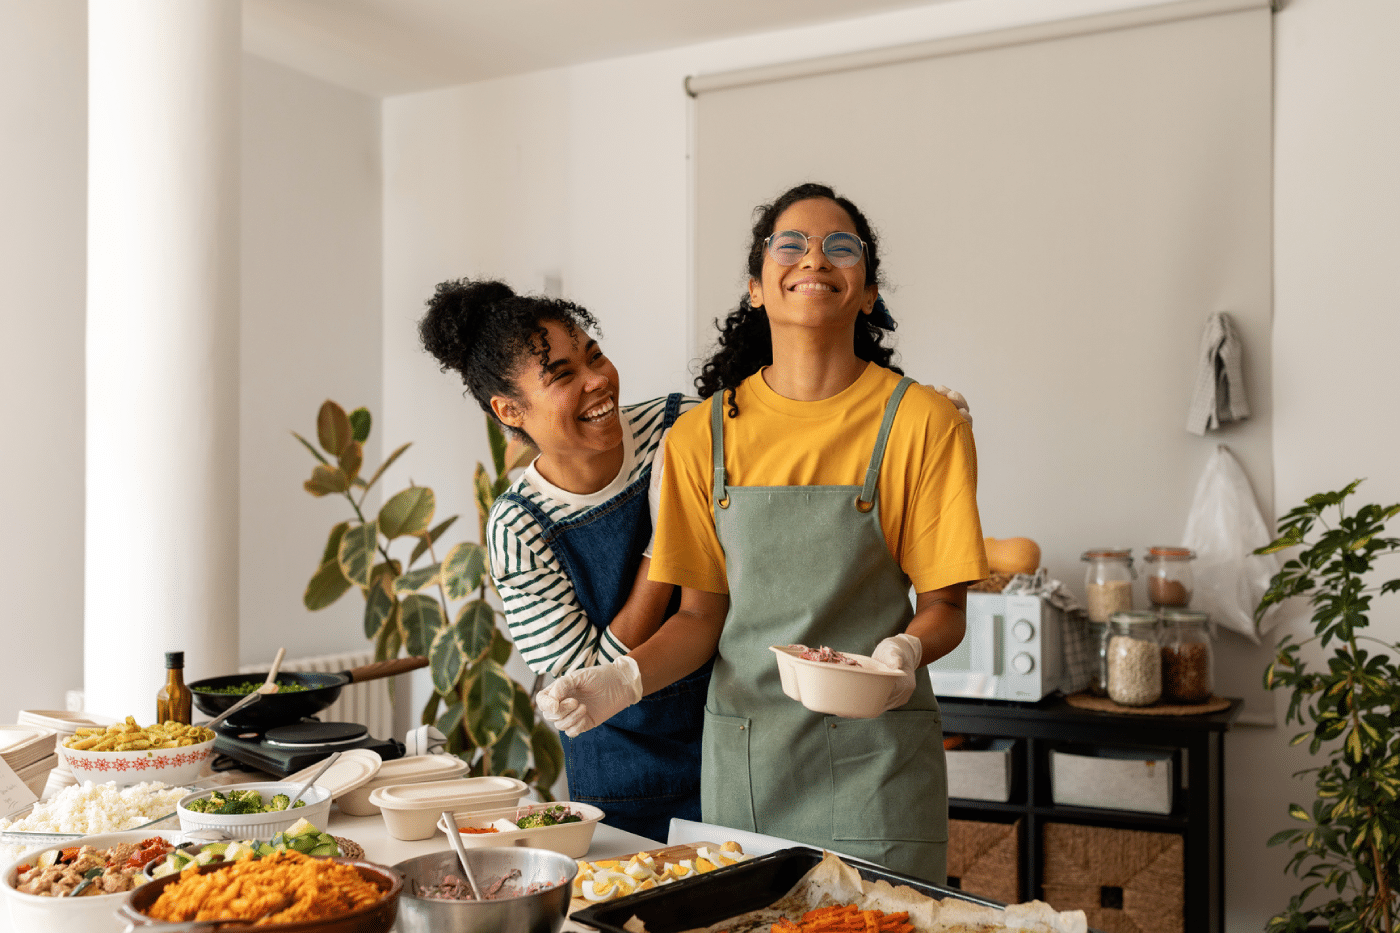 Female cooks having fun making different dishes prepared to serve at home